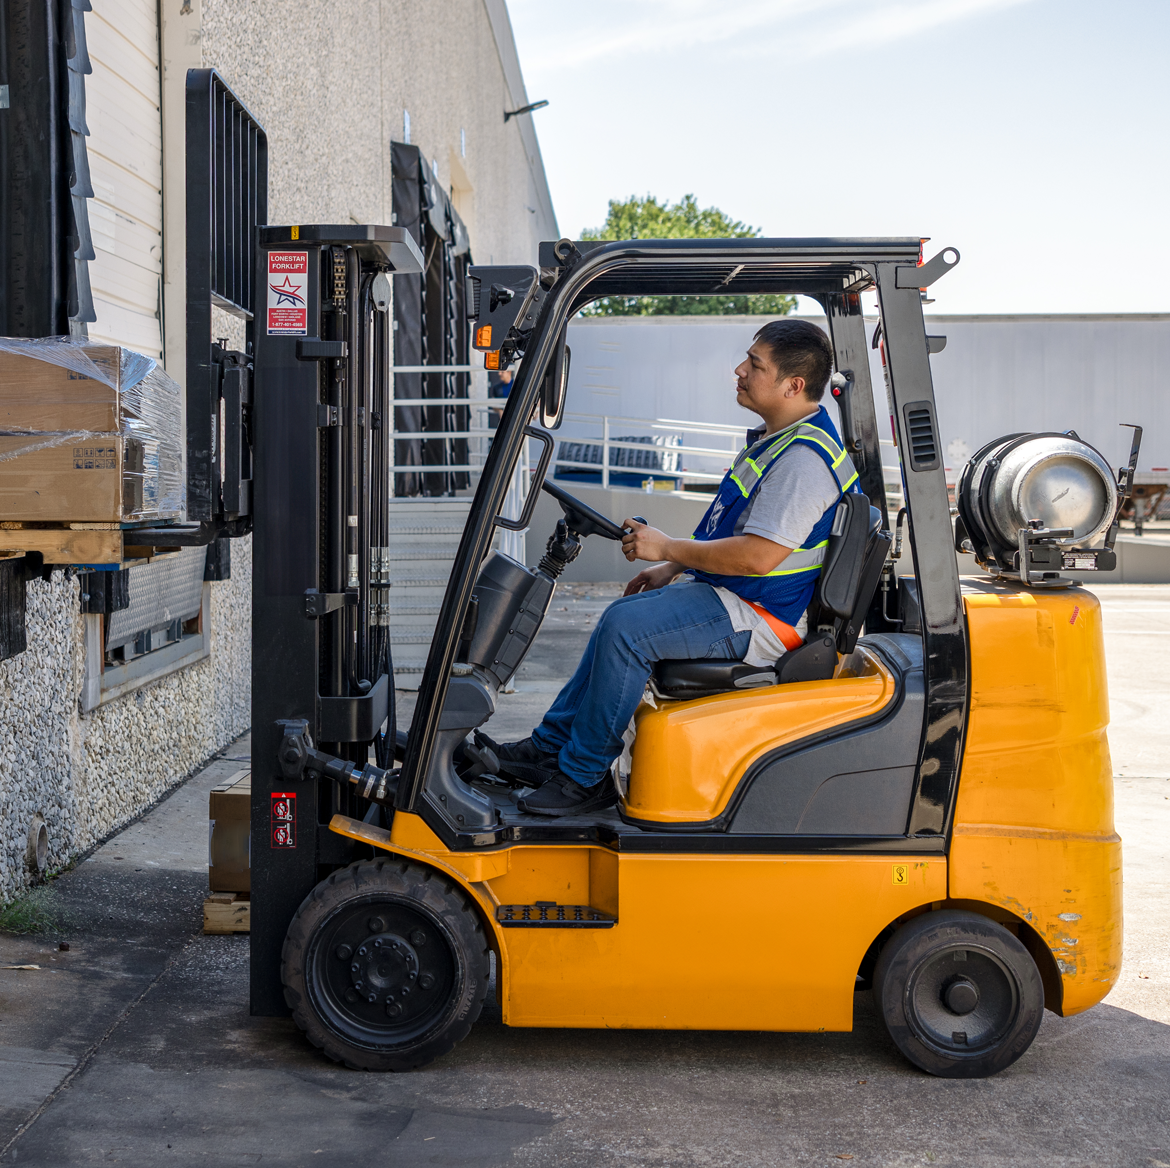 A Morrison warehouse worker operating a forklift outside the warehouse, unloading cargo.